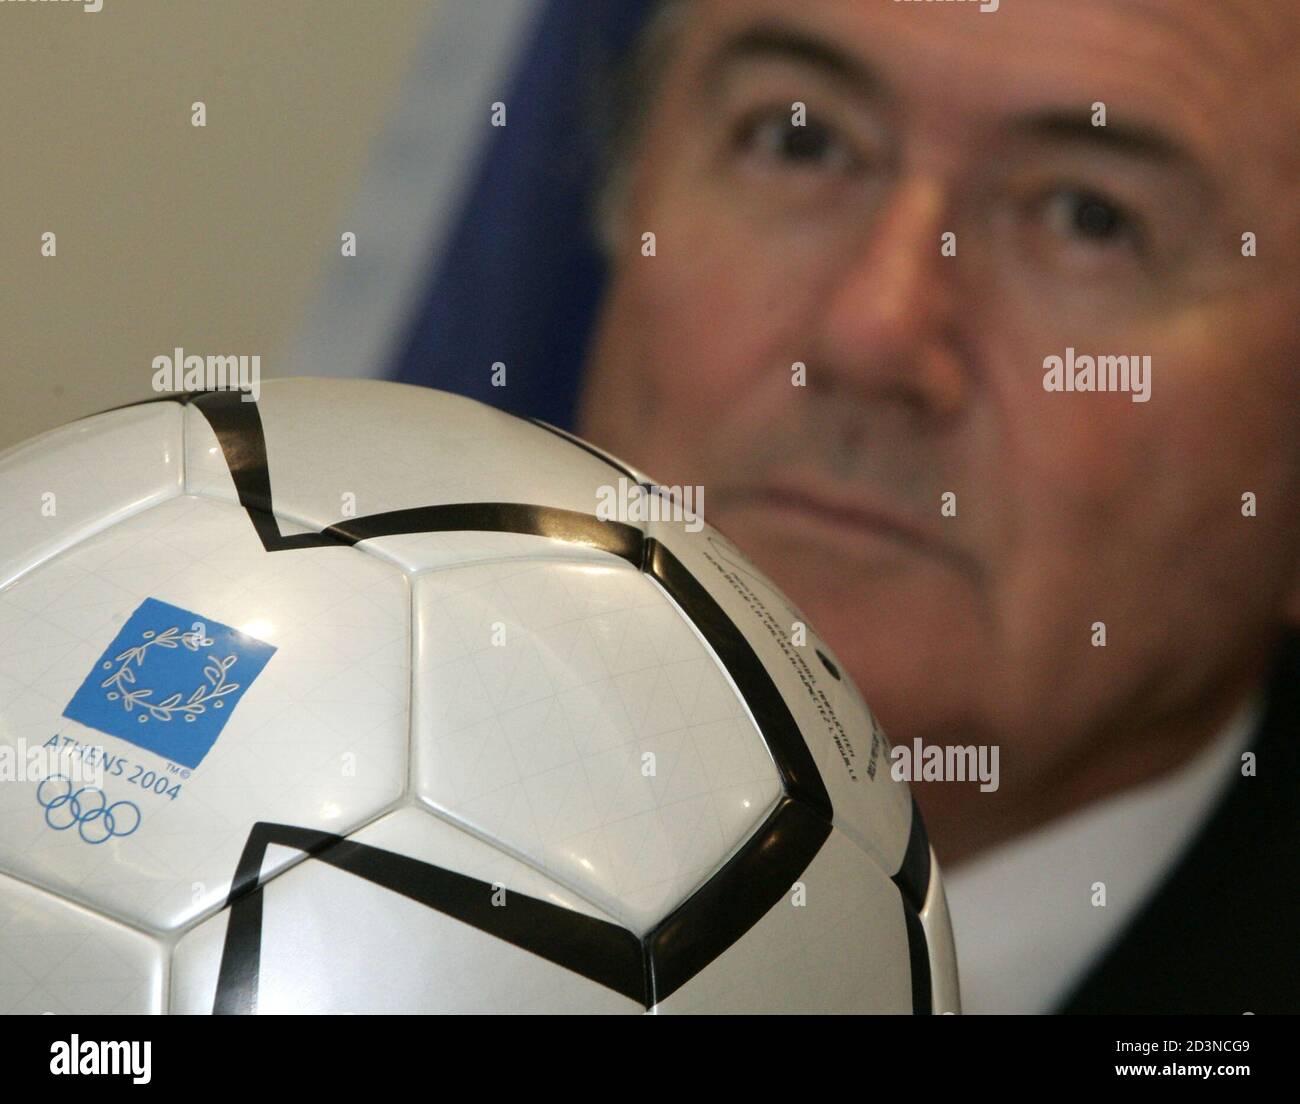 FIFA president Sepp Blatter speaks during a news conference in Athens, August 9, 2004. Blatter said on Monday that Ivan Slavkov will remain the president of the Bulgarian Football Association despite being suspended as the head of the country's Olympic committee. REUTERS/Ruben Sprich  RS/DL Stock Photo